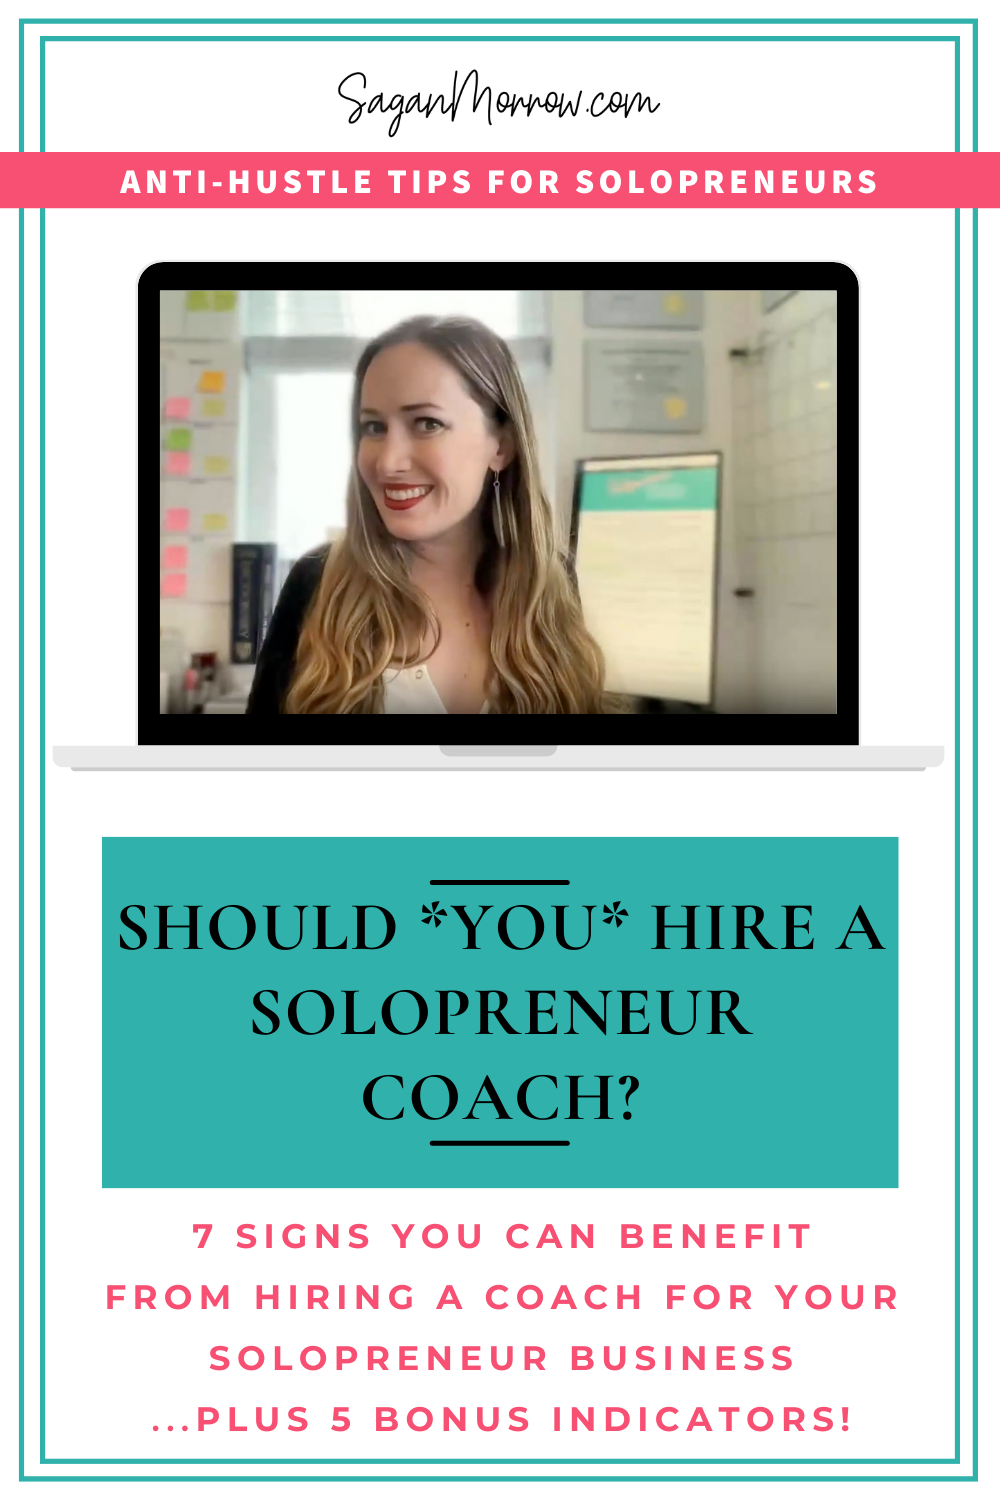 7 signs you can benefit from hiring a solopreneur coach for your solopreneur business